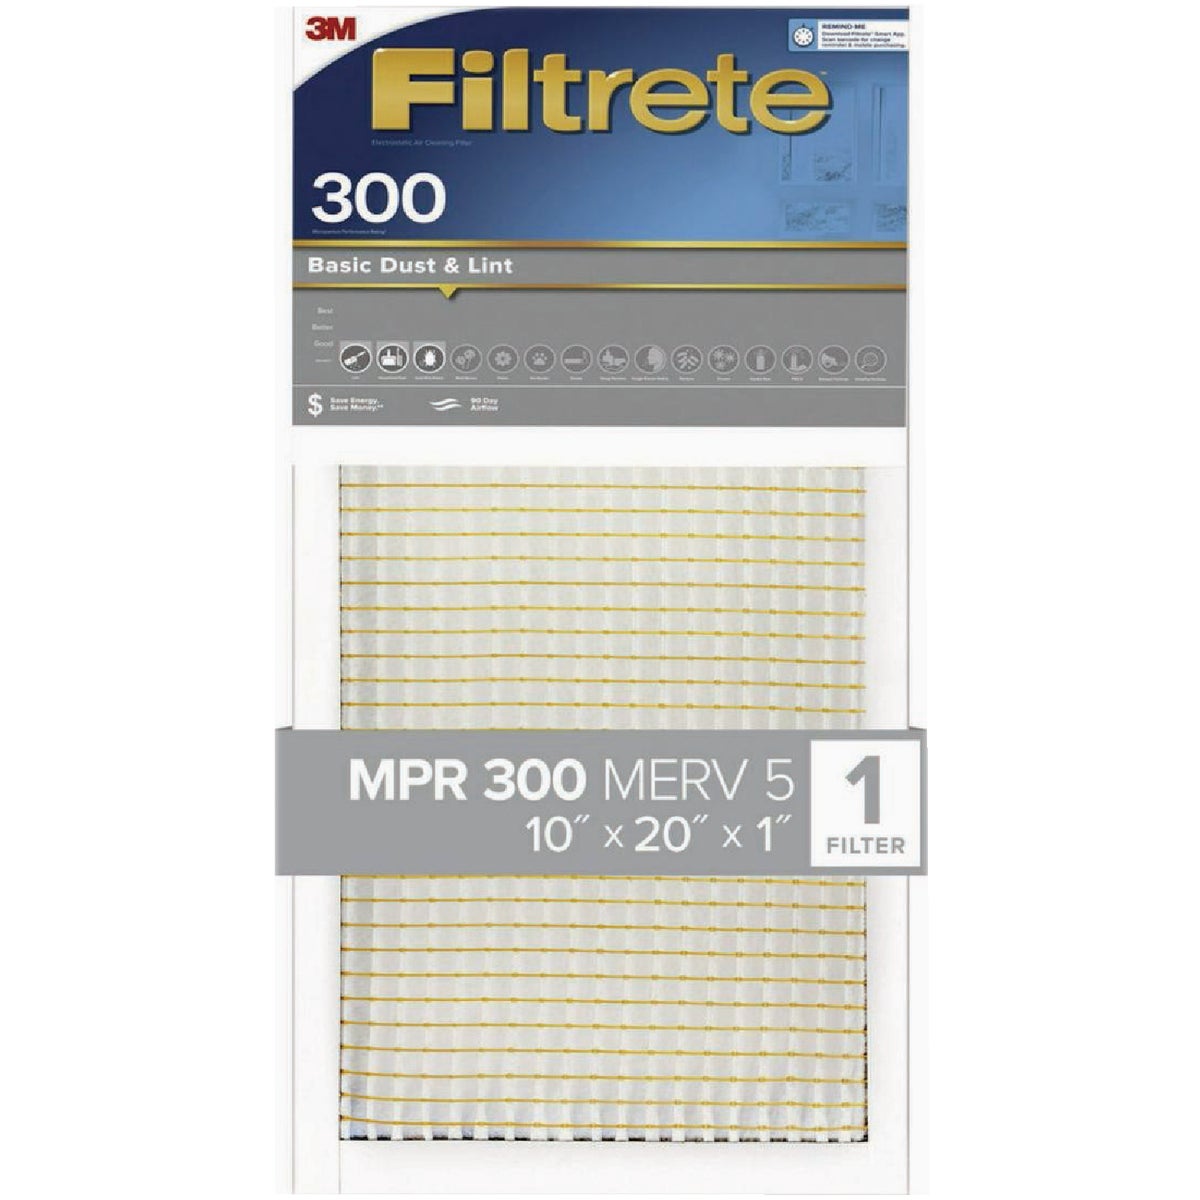 3M 307DC-6 3M Filtrete 10 In. x 20 In. x 1 In. Basic Dust & Lint 300 MPR Furnace Filter 307DC-6 Pack of 6